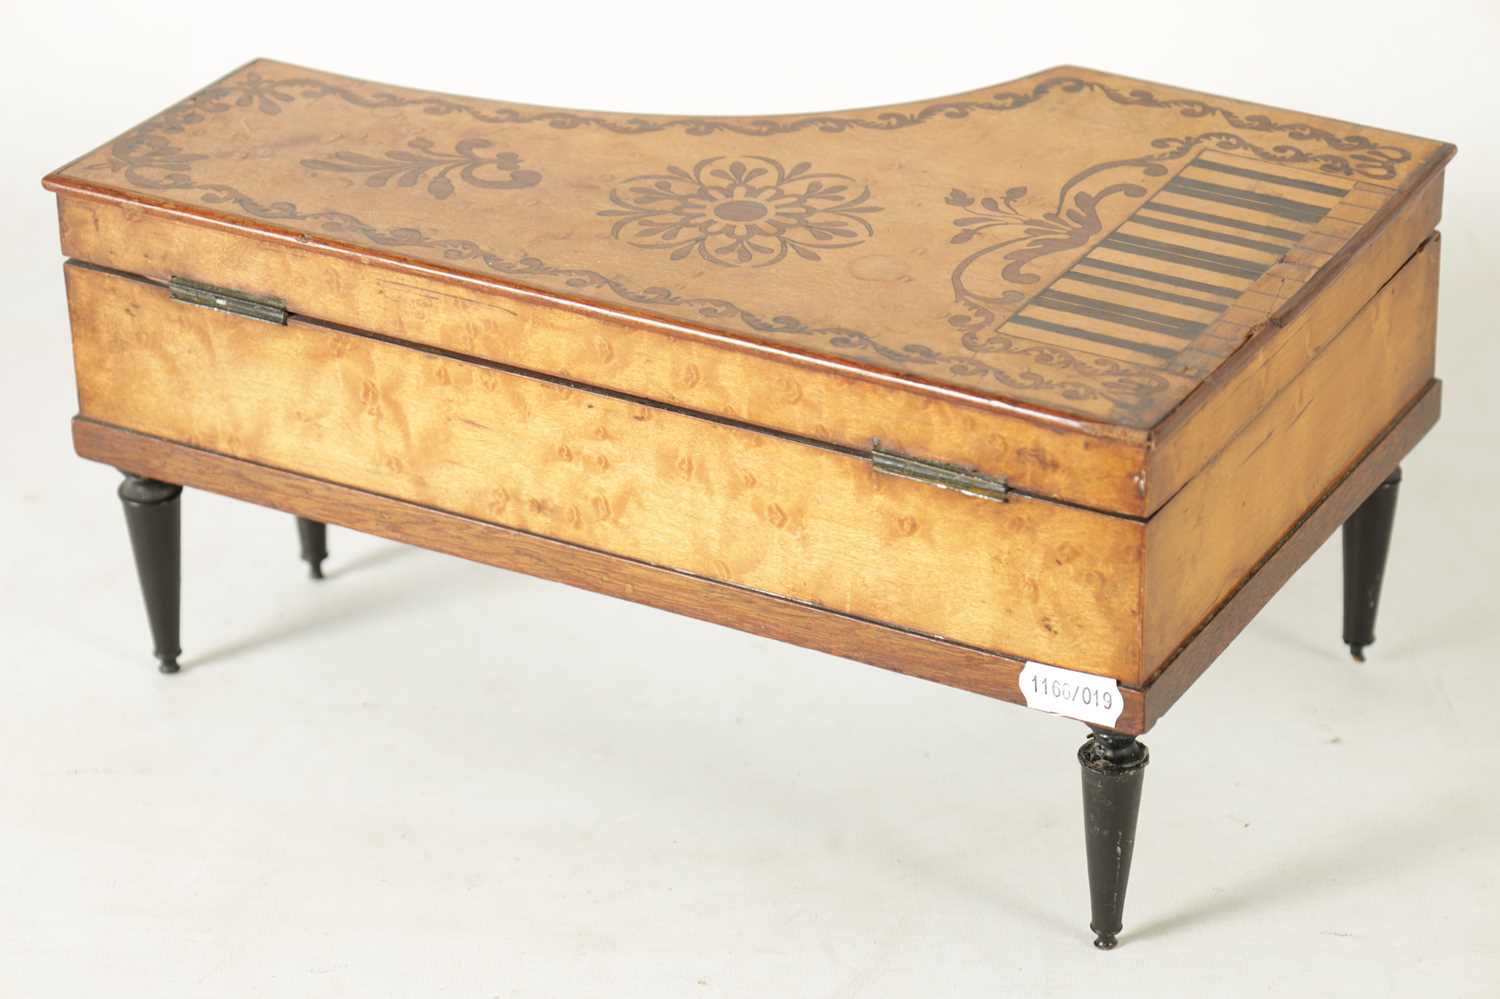 A MID 19TH CENTURY FRENCH MUSICAL INLAID SEWING BOX - Image 5 of 11